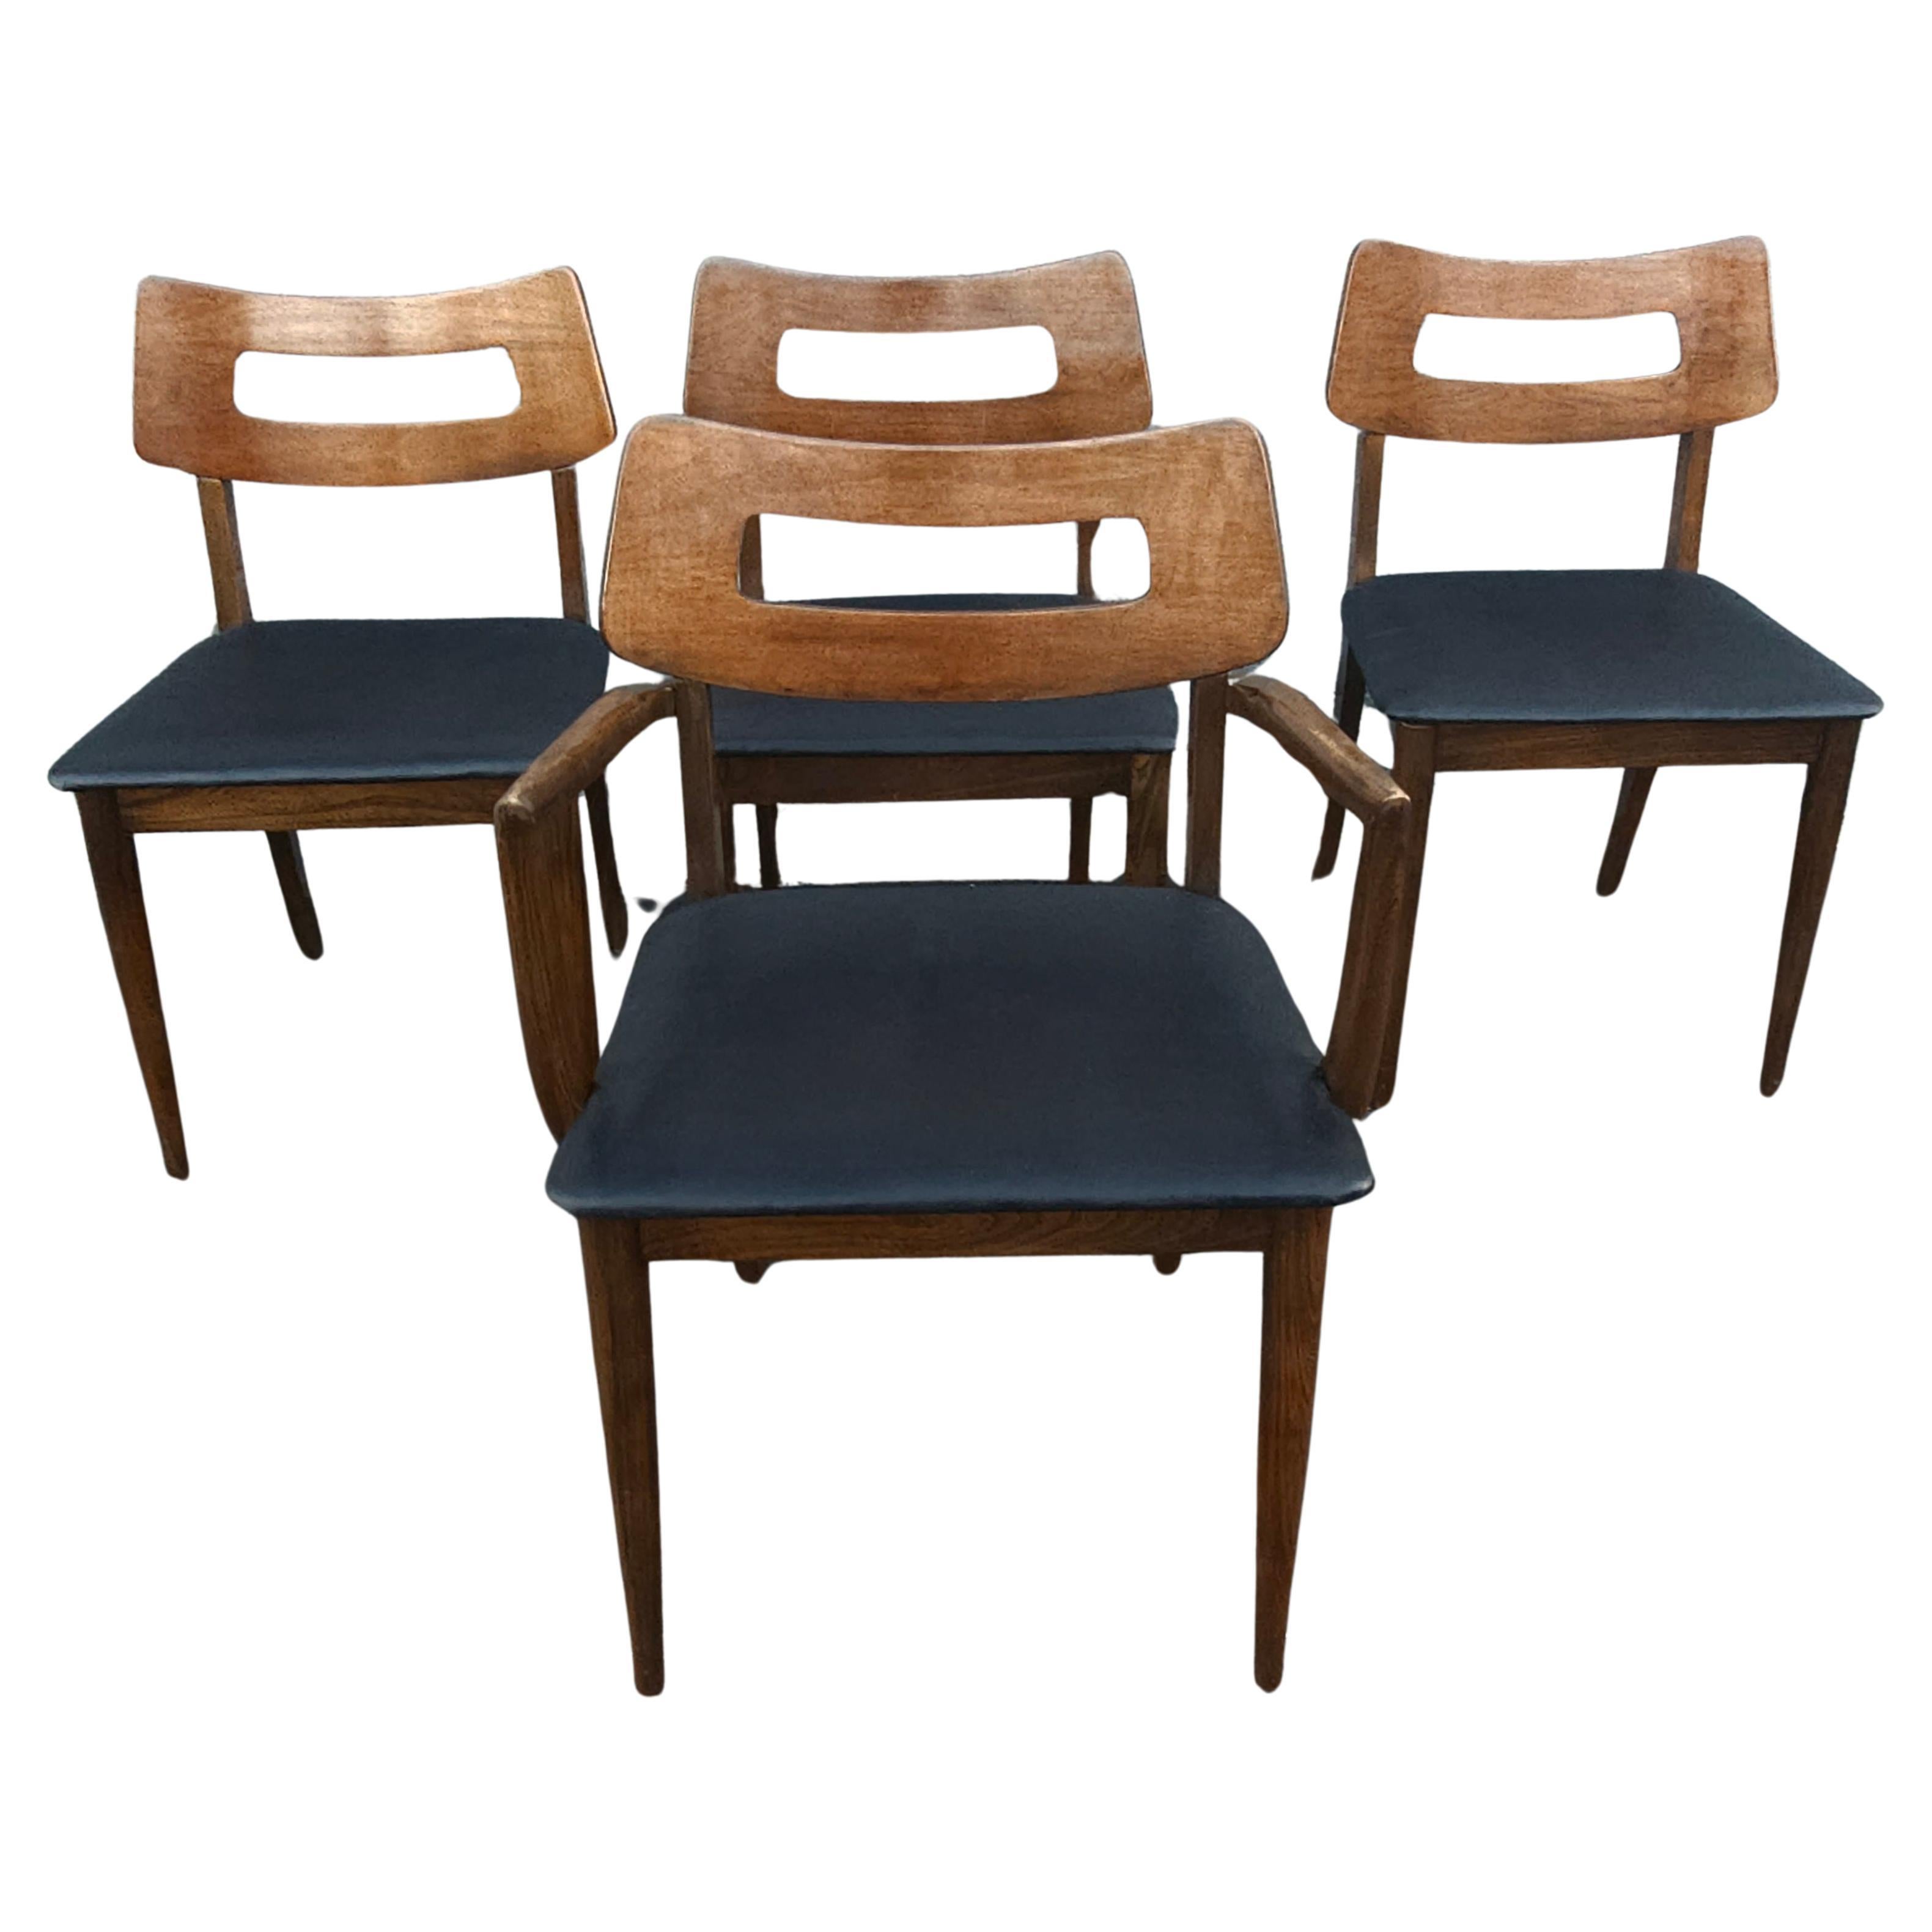 Set of 4 Mid Century Walnut and Vinyl Seat Upholstered Chairs For Sale